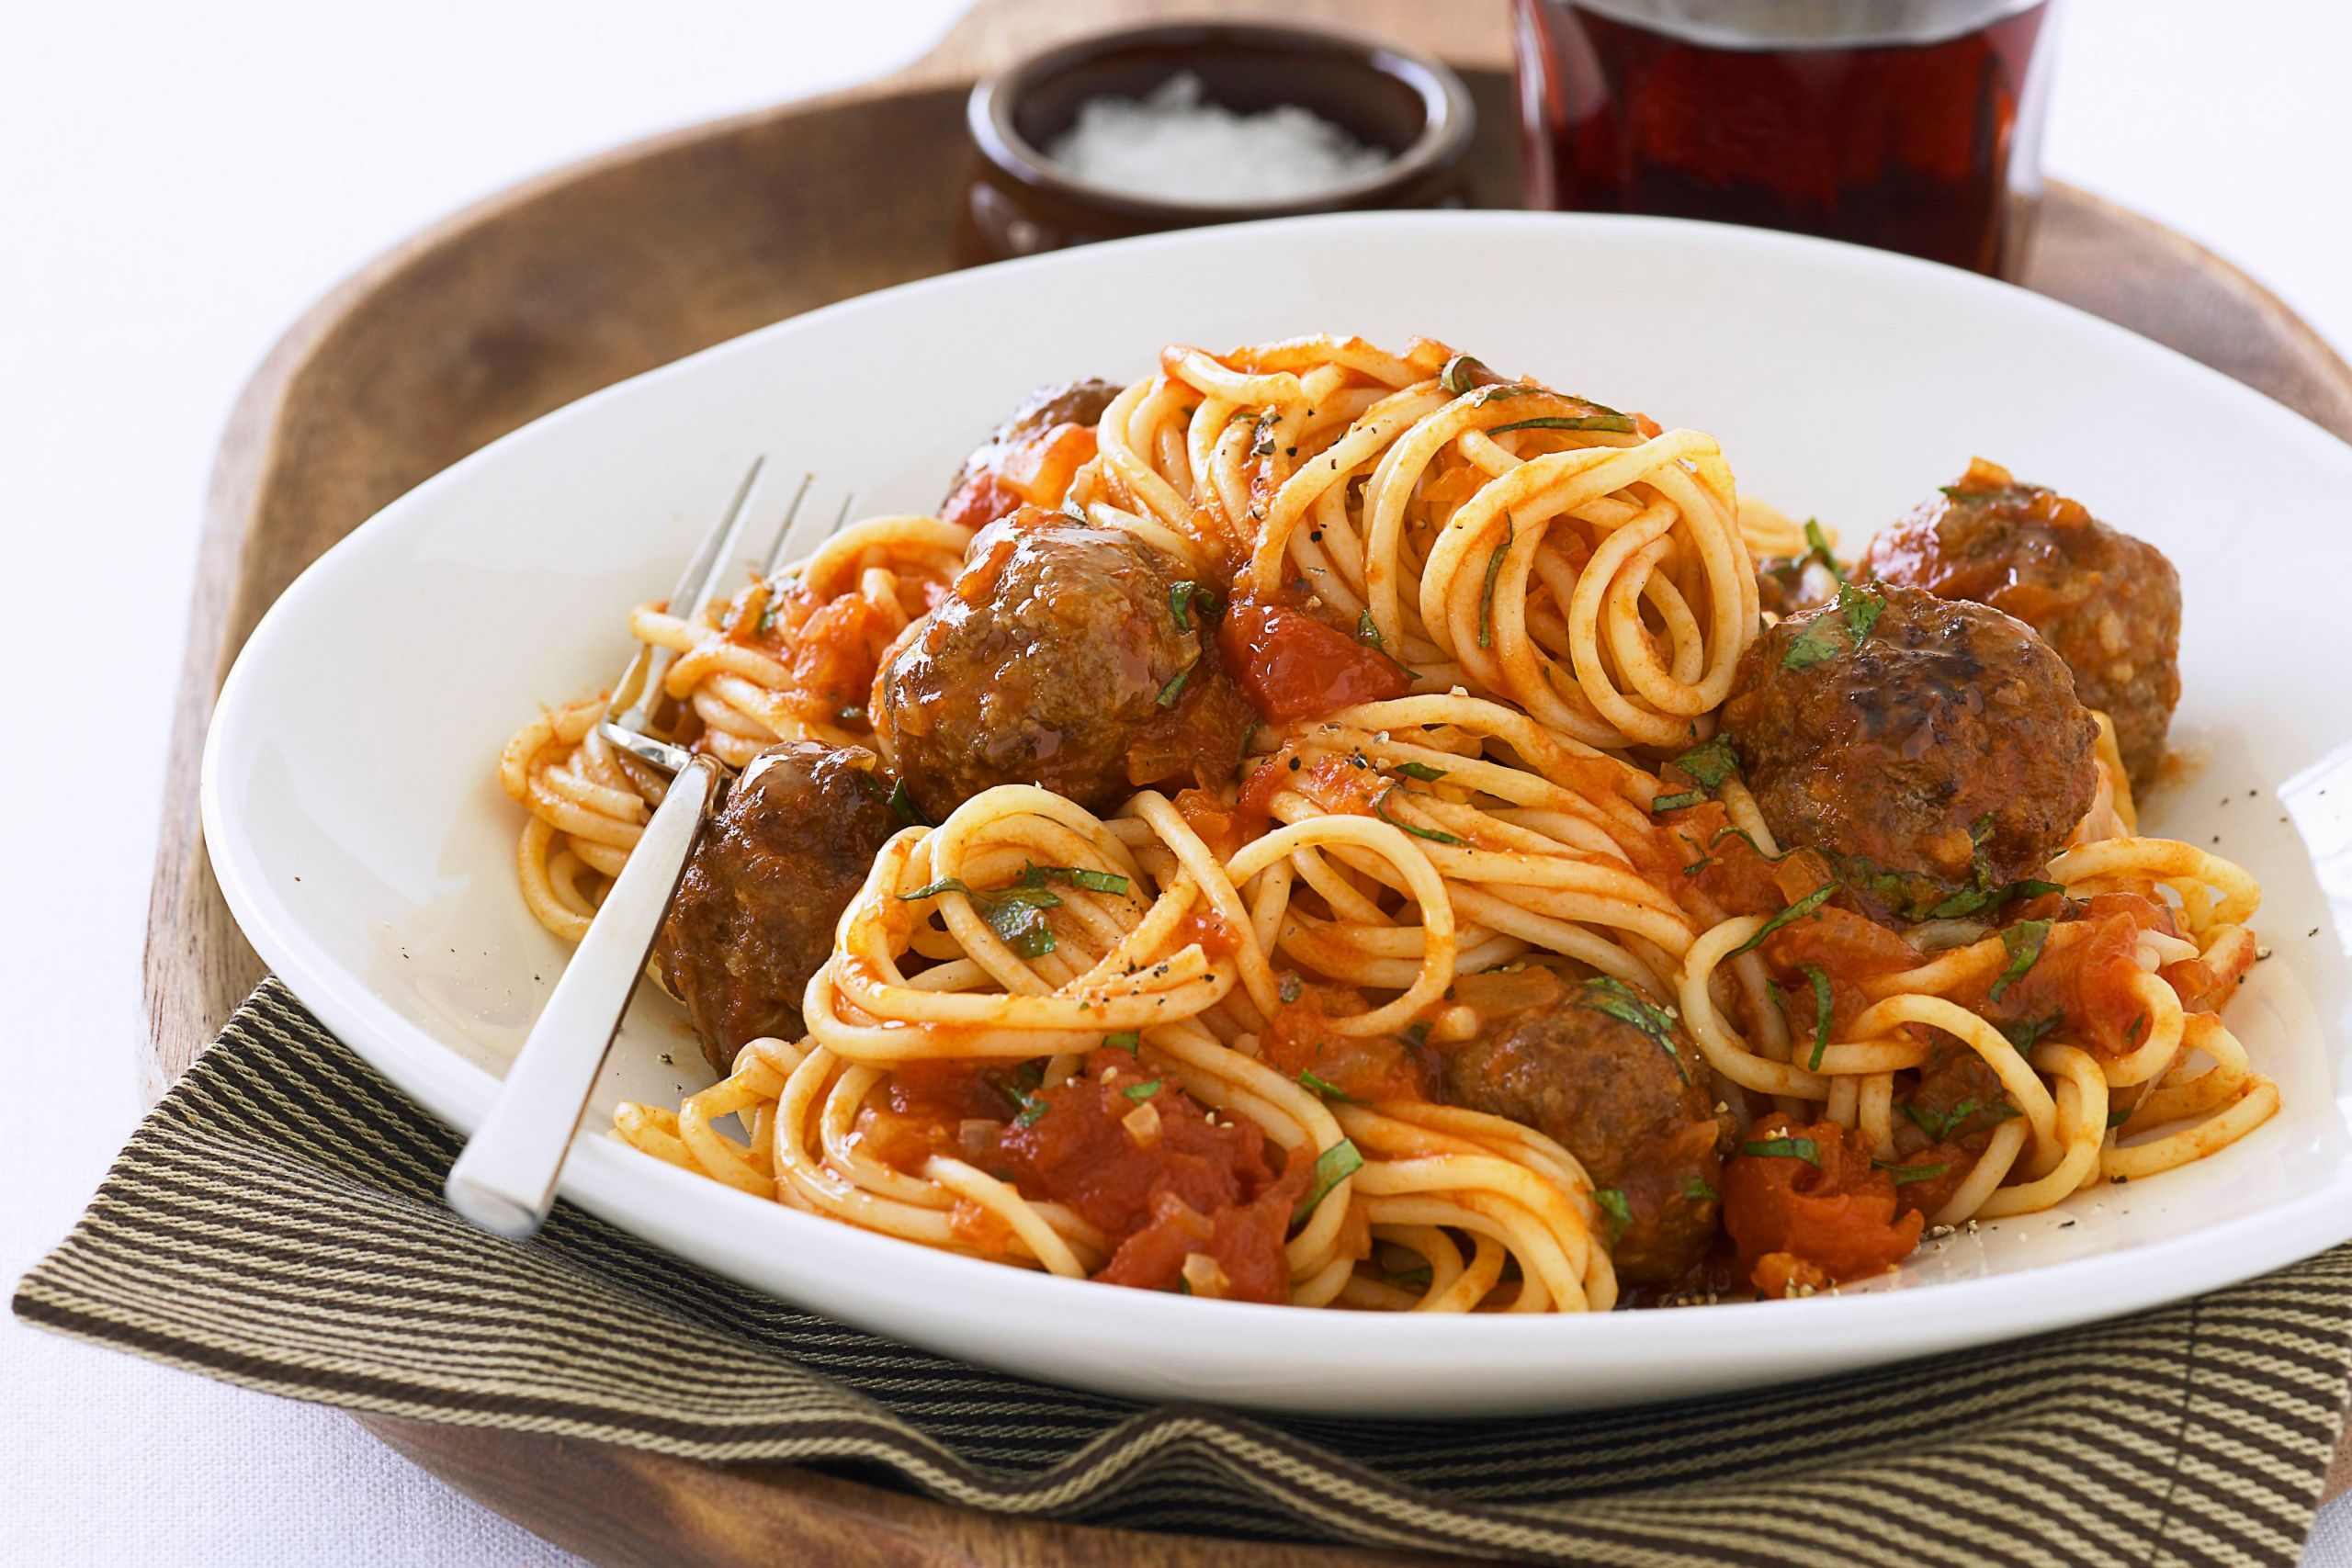 Frozen Meatball Recipes Easy Dinners
 The 14 Best Frozen Meatball Recipes